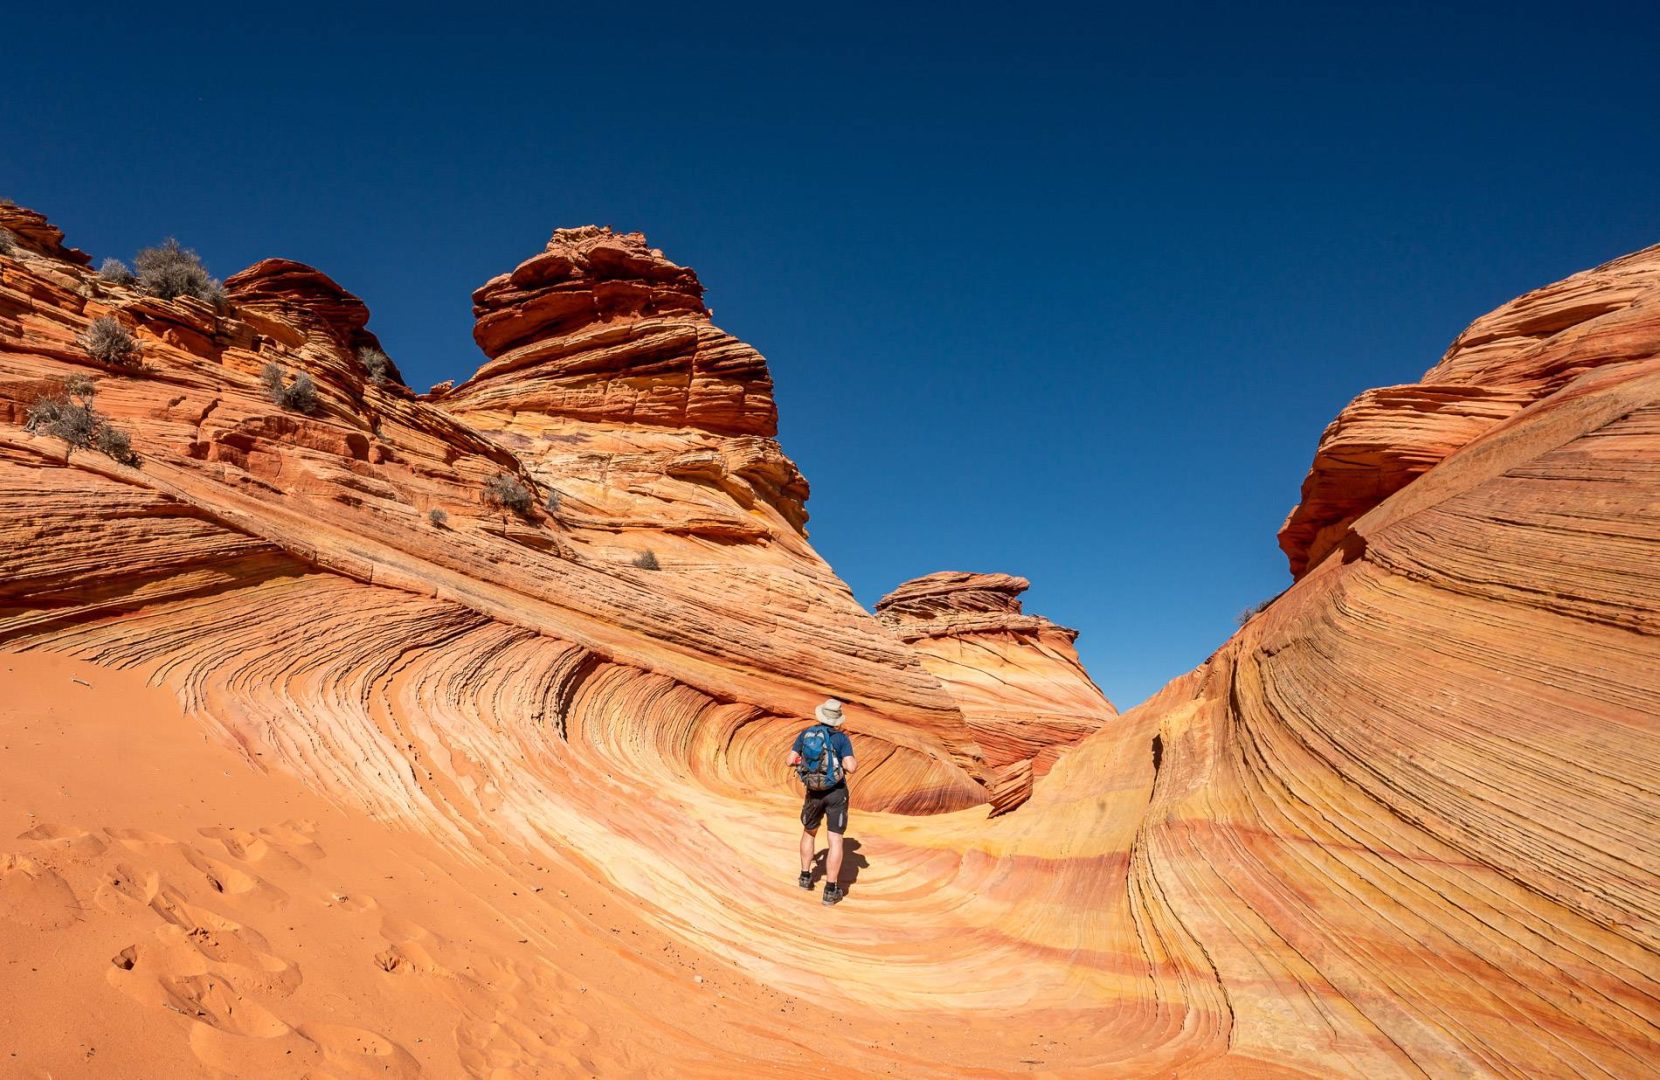 Wave like scenery at Coyote Buttes South